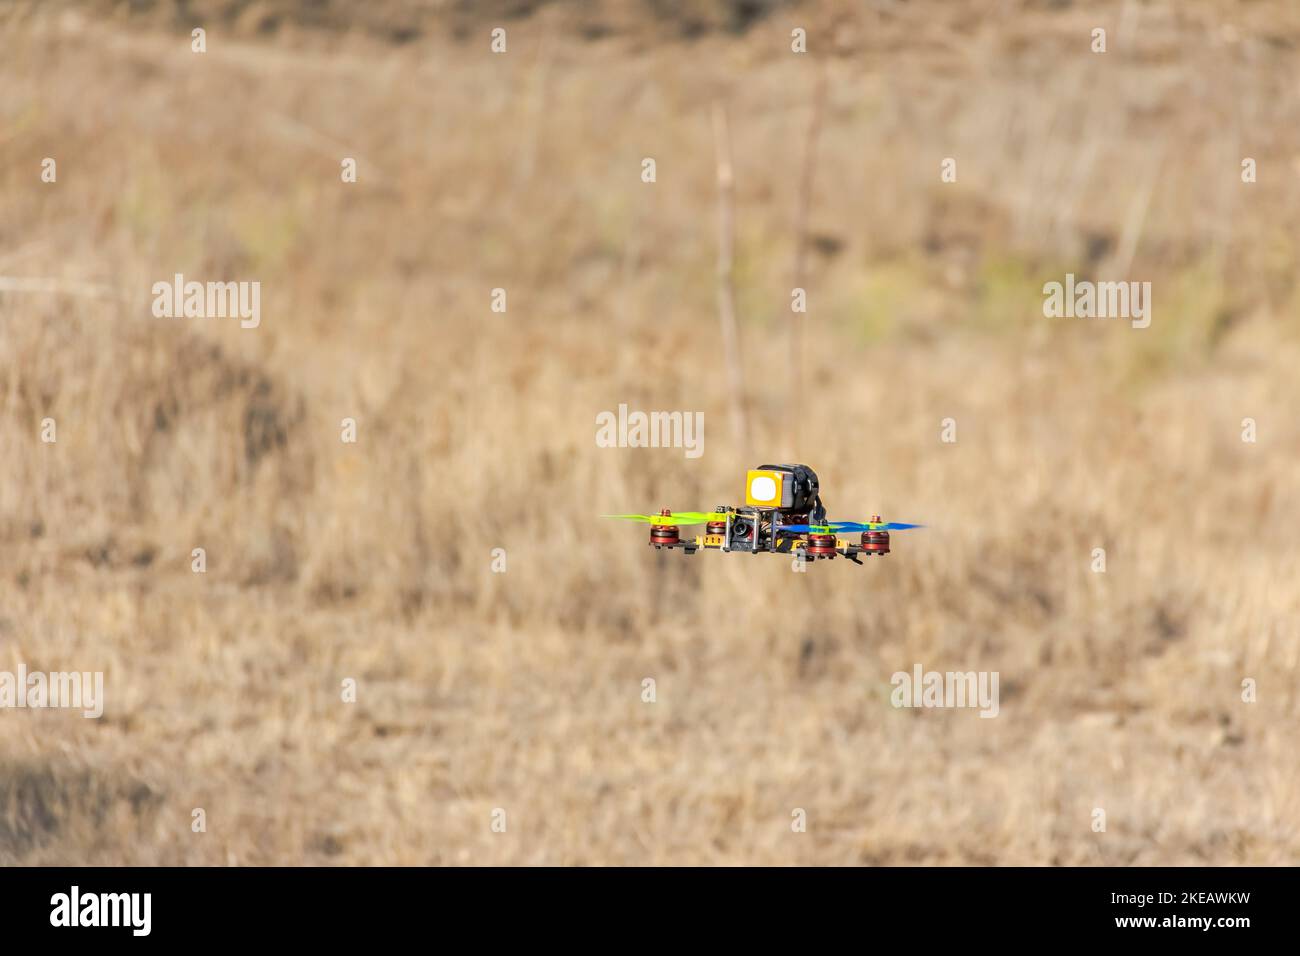 Flying quadcopter drone next to the ground with yellow herbs blurred in background. Surface level view of the unmaned vehicle. Stock Photo